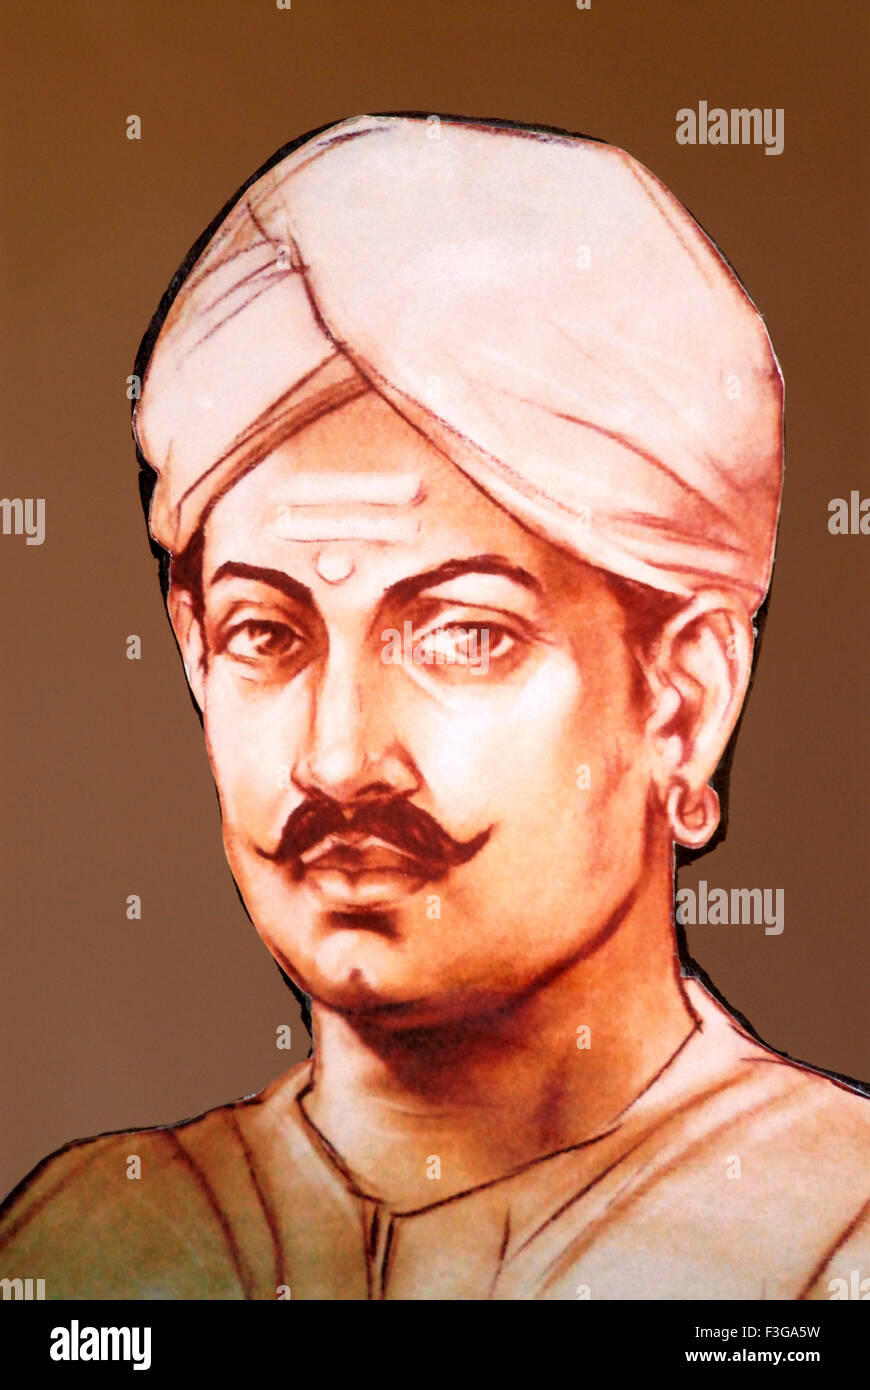 Mangal Pandey great freedom fighter of India's first war of Independence Indian Mutiny 1857 Stock Photo